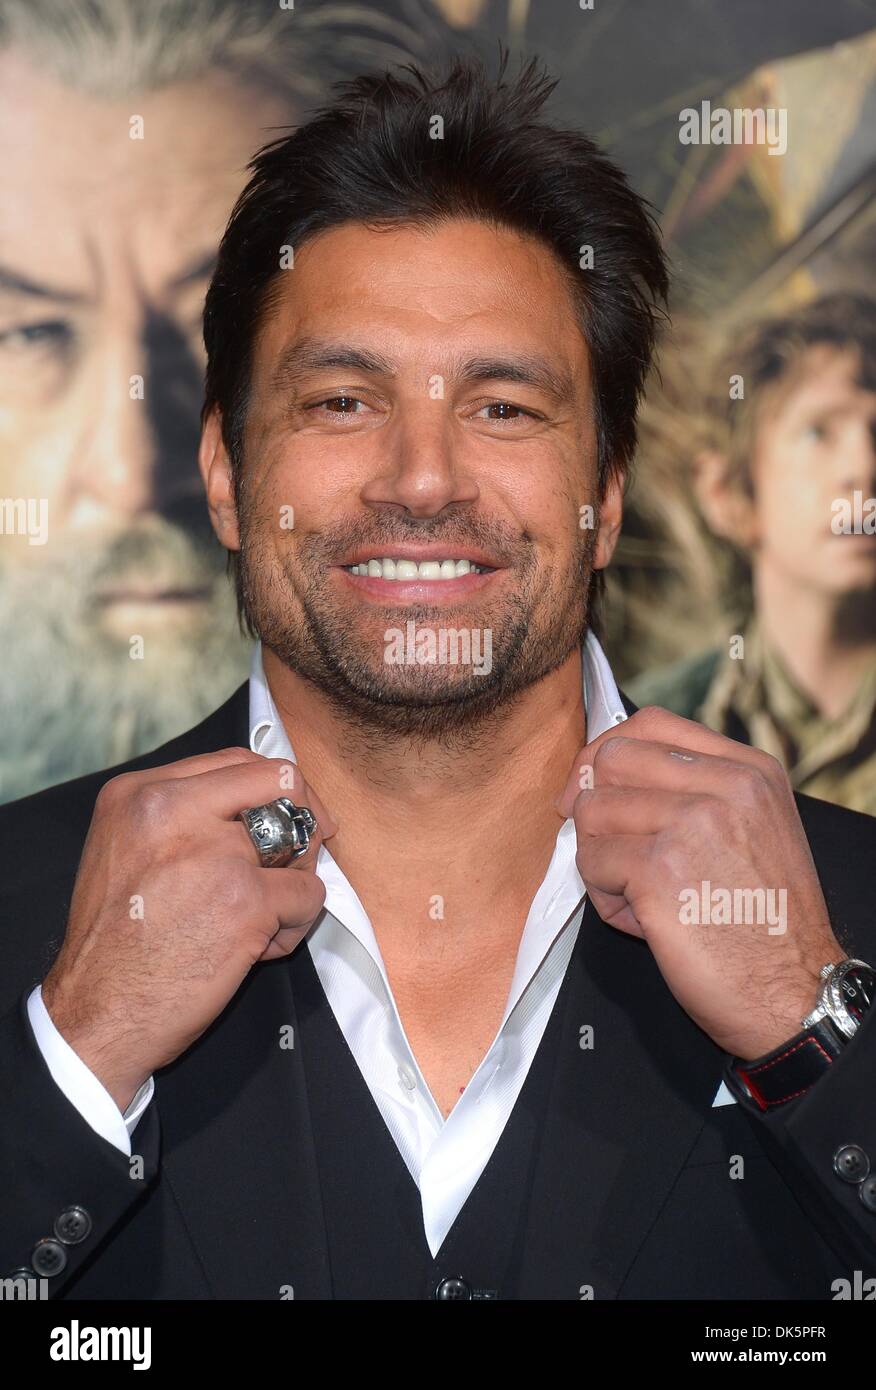 Los Angeles, USA. 2nd December 2013. Manu Bennett arrives at premiere for The Hobbit, Desolation of Smaug, Los Angeles, America - 2 Dec 2013 Credit:  Sydney Alford/Alamy Live News Stock Photo